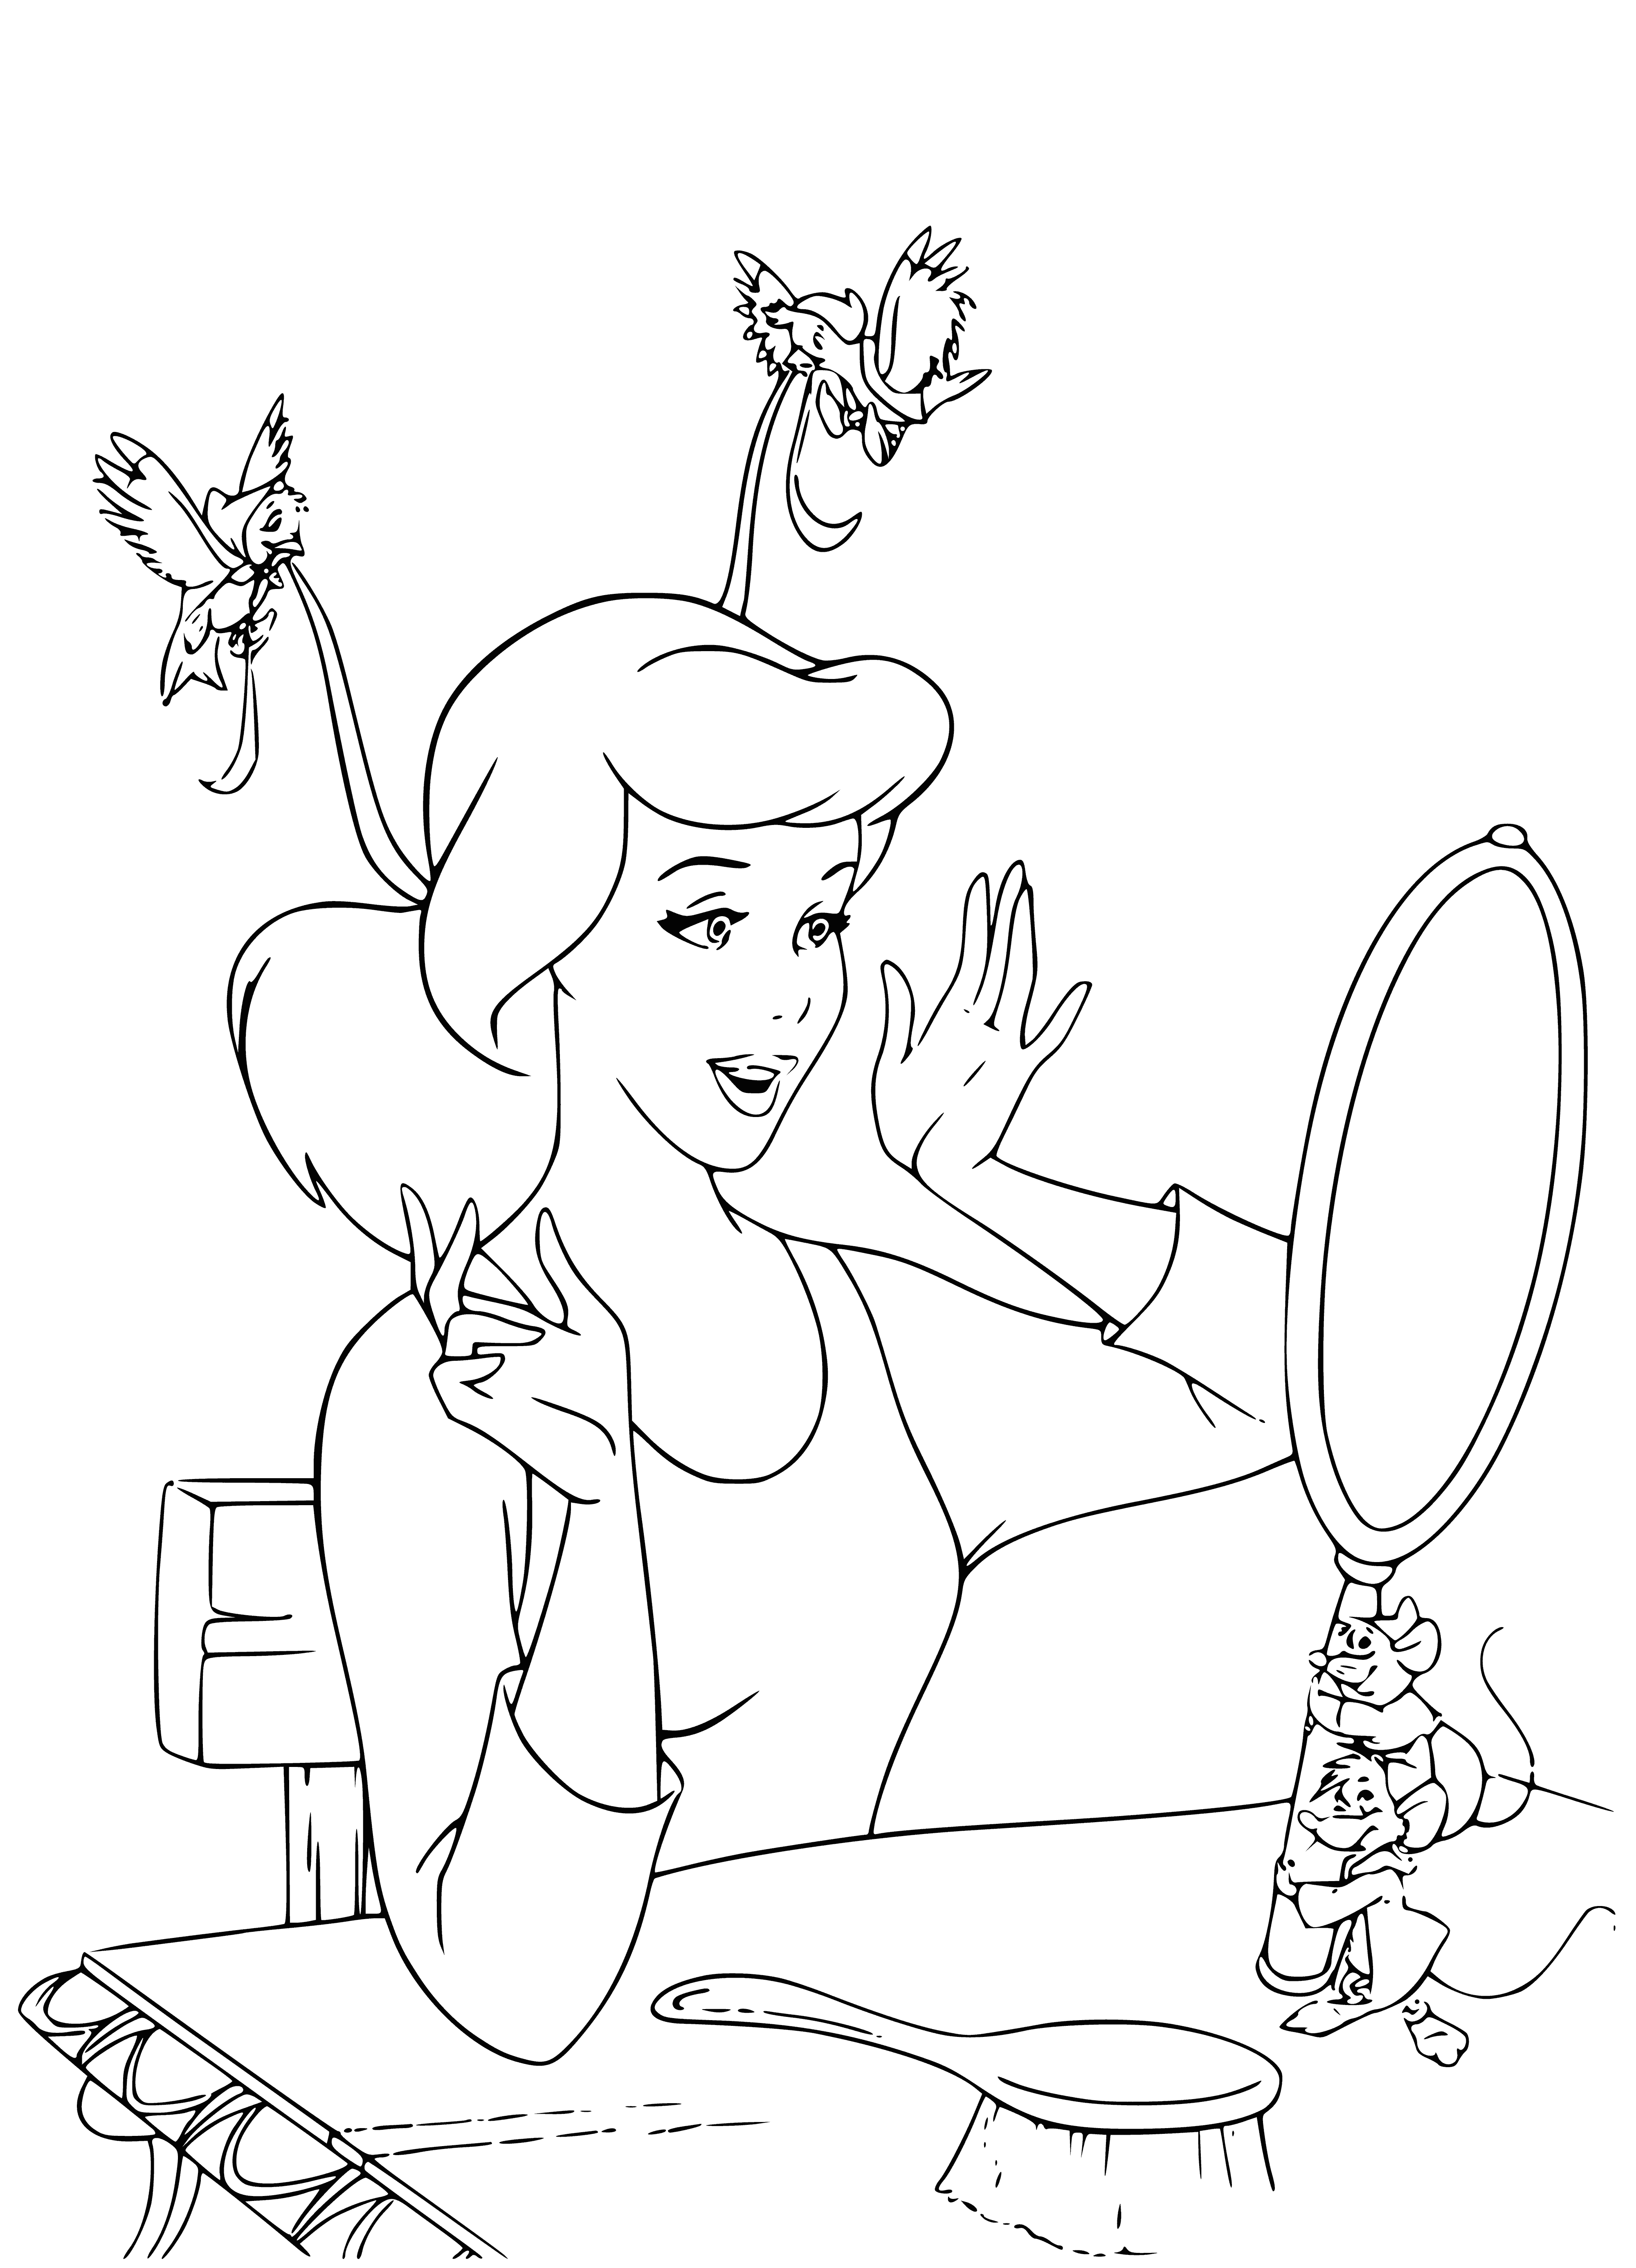 Cinderella in front of the mirror coloring page